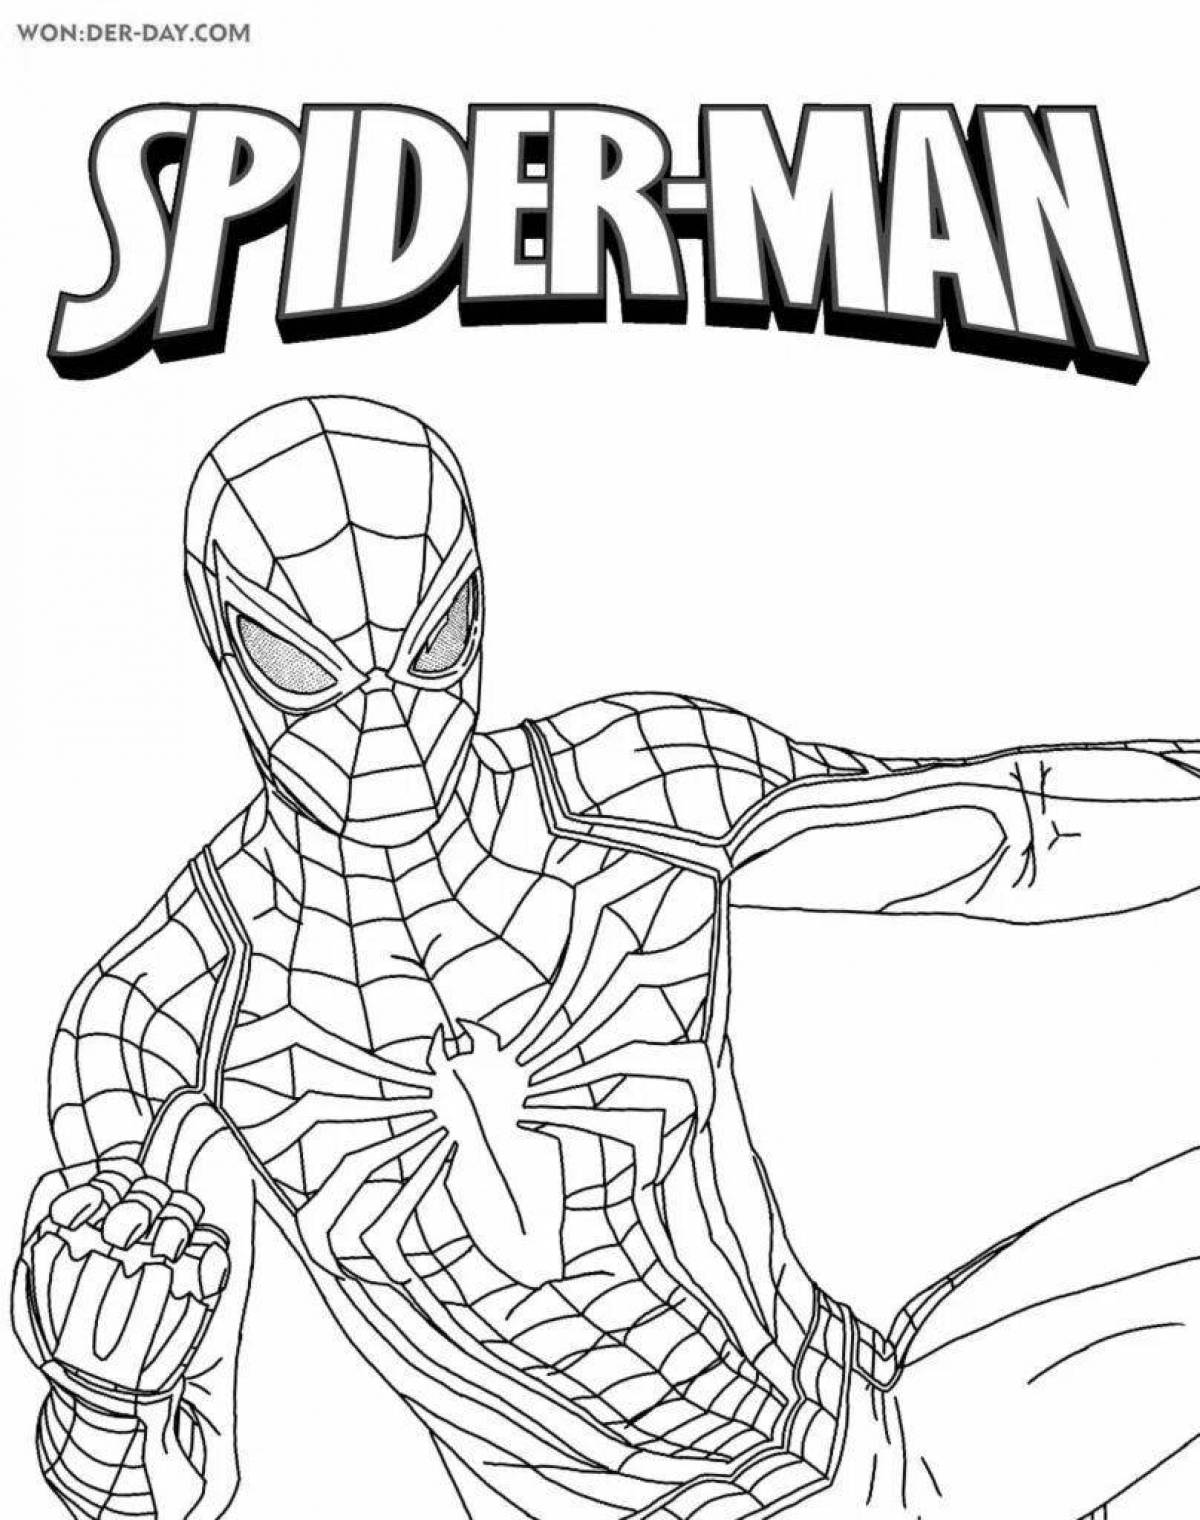 Spider-man with claws coloring page